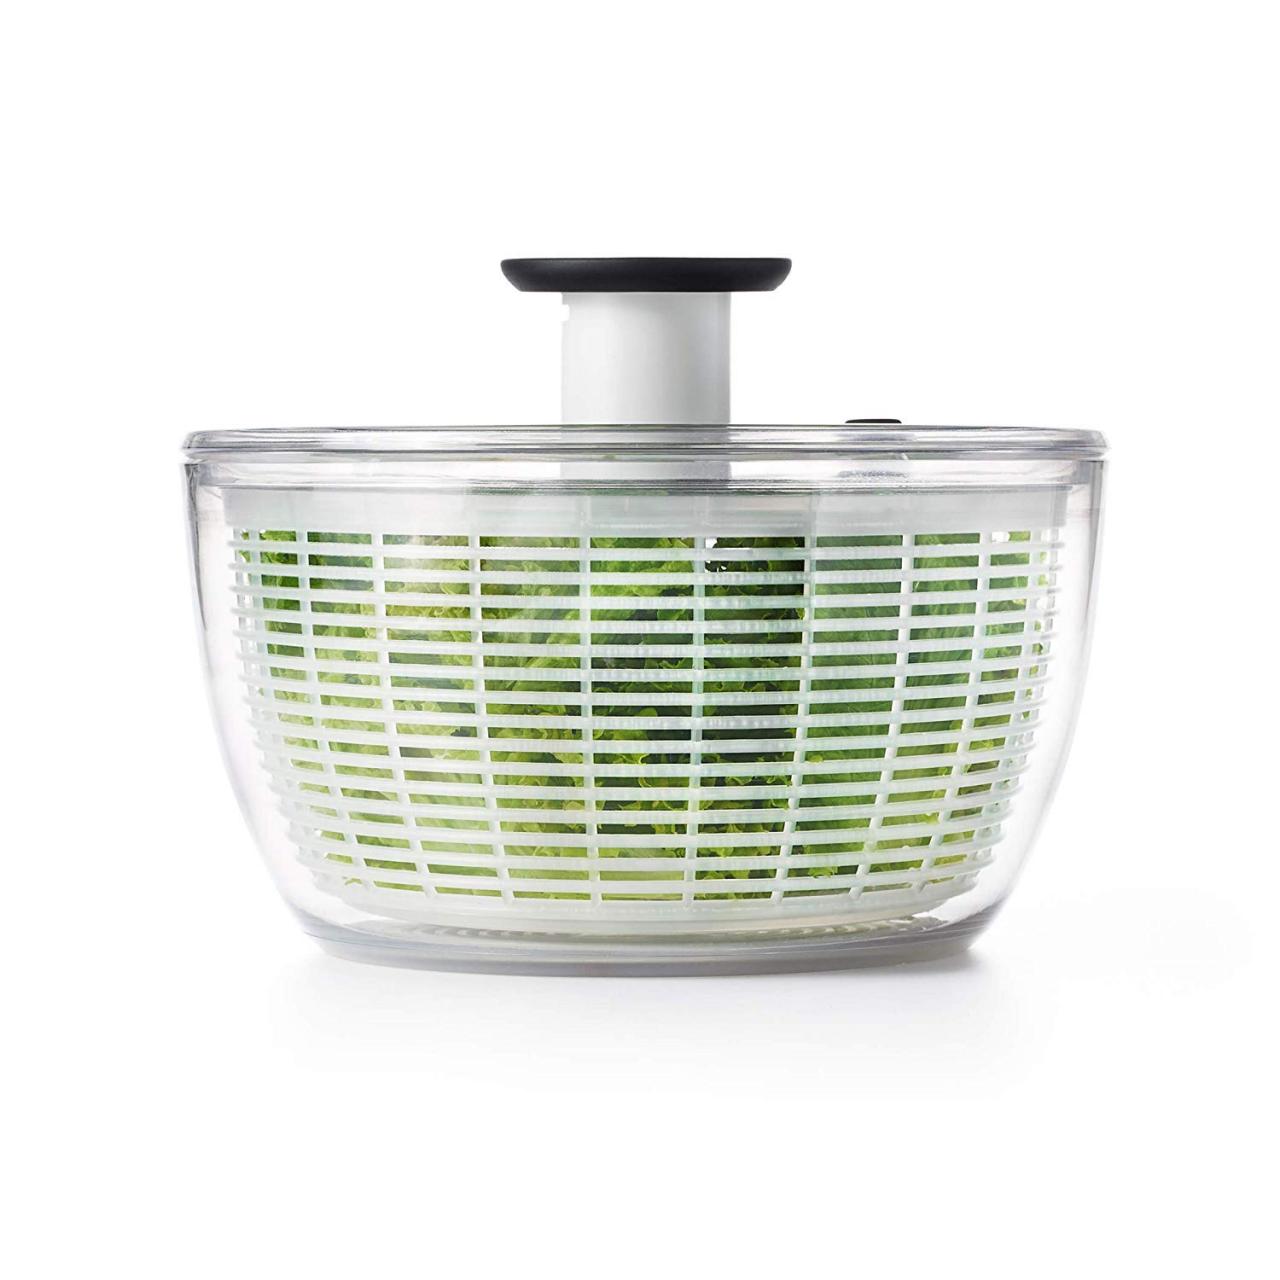 The Best Salad Spinners Reviewed in 2020